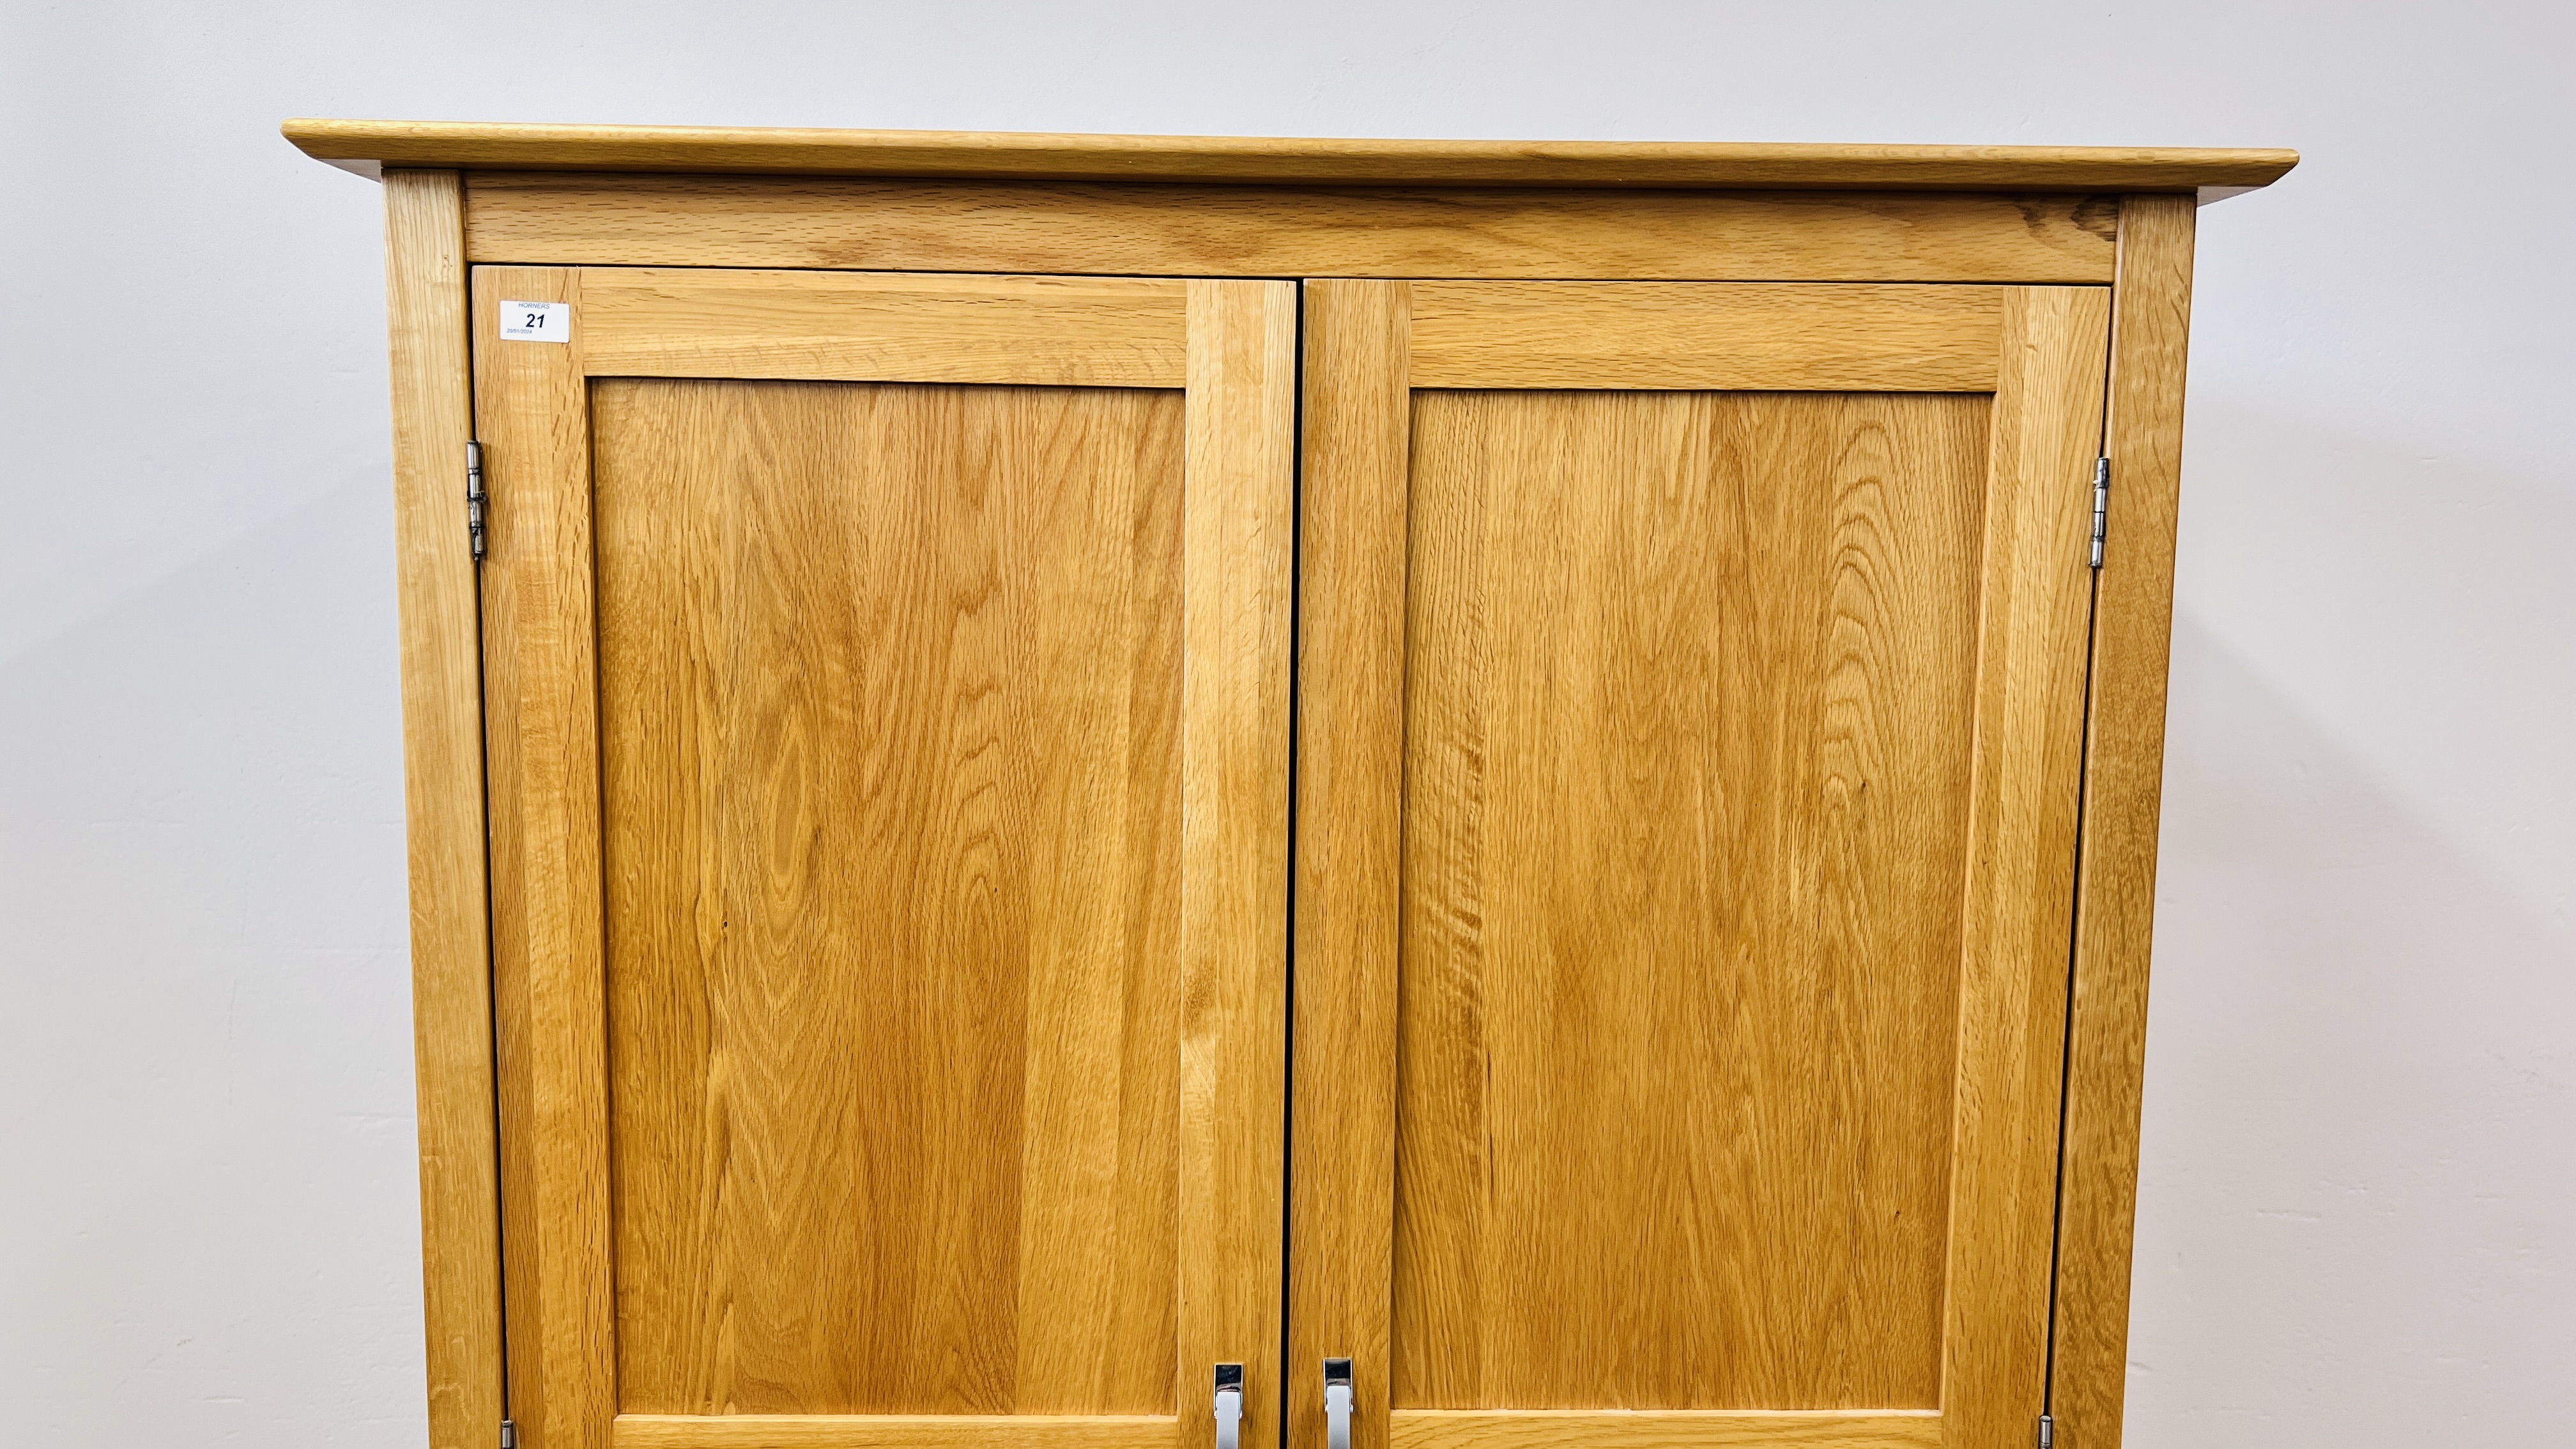 A SOLID LIGHT OAK DOUBLE WARDROBE WITH DRAWER TO BASE, W - 110CM, D - 60CM, H - 191CM. - Image 4 of 8